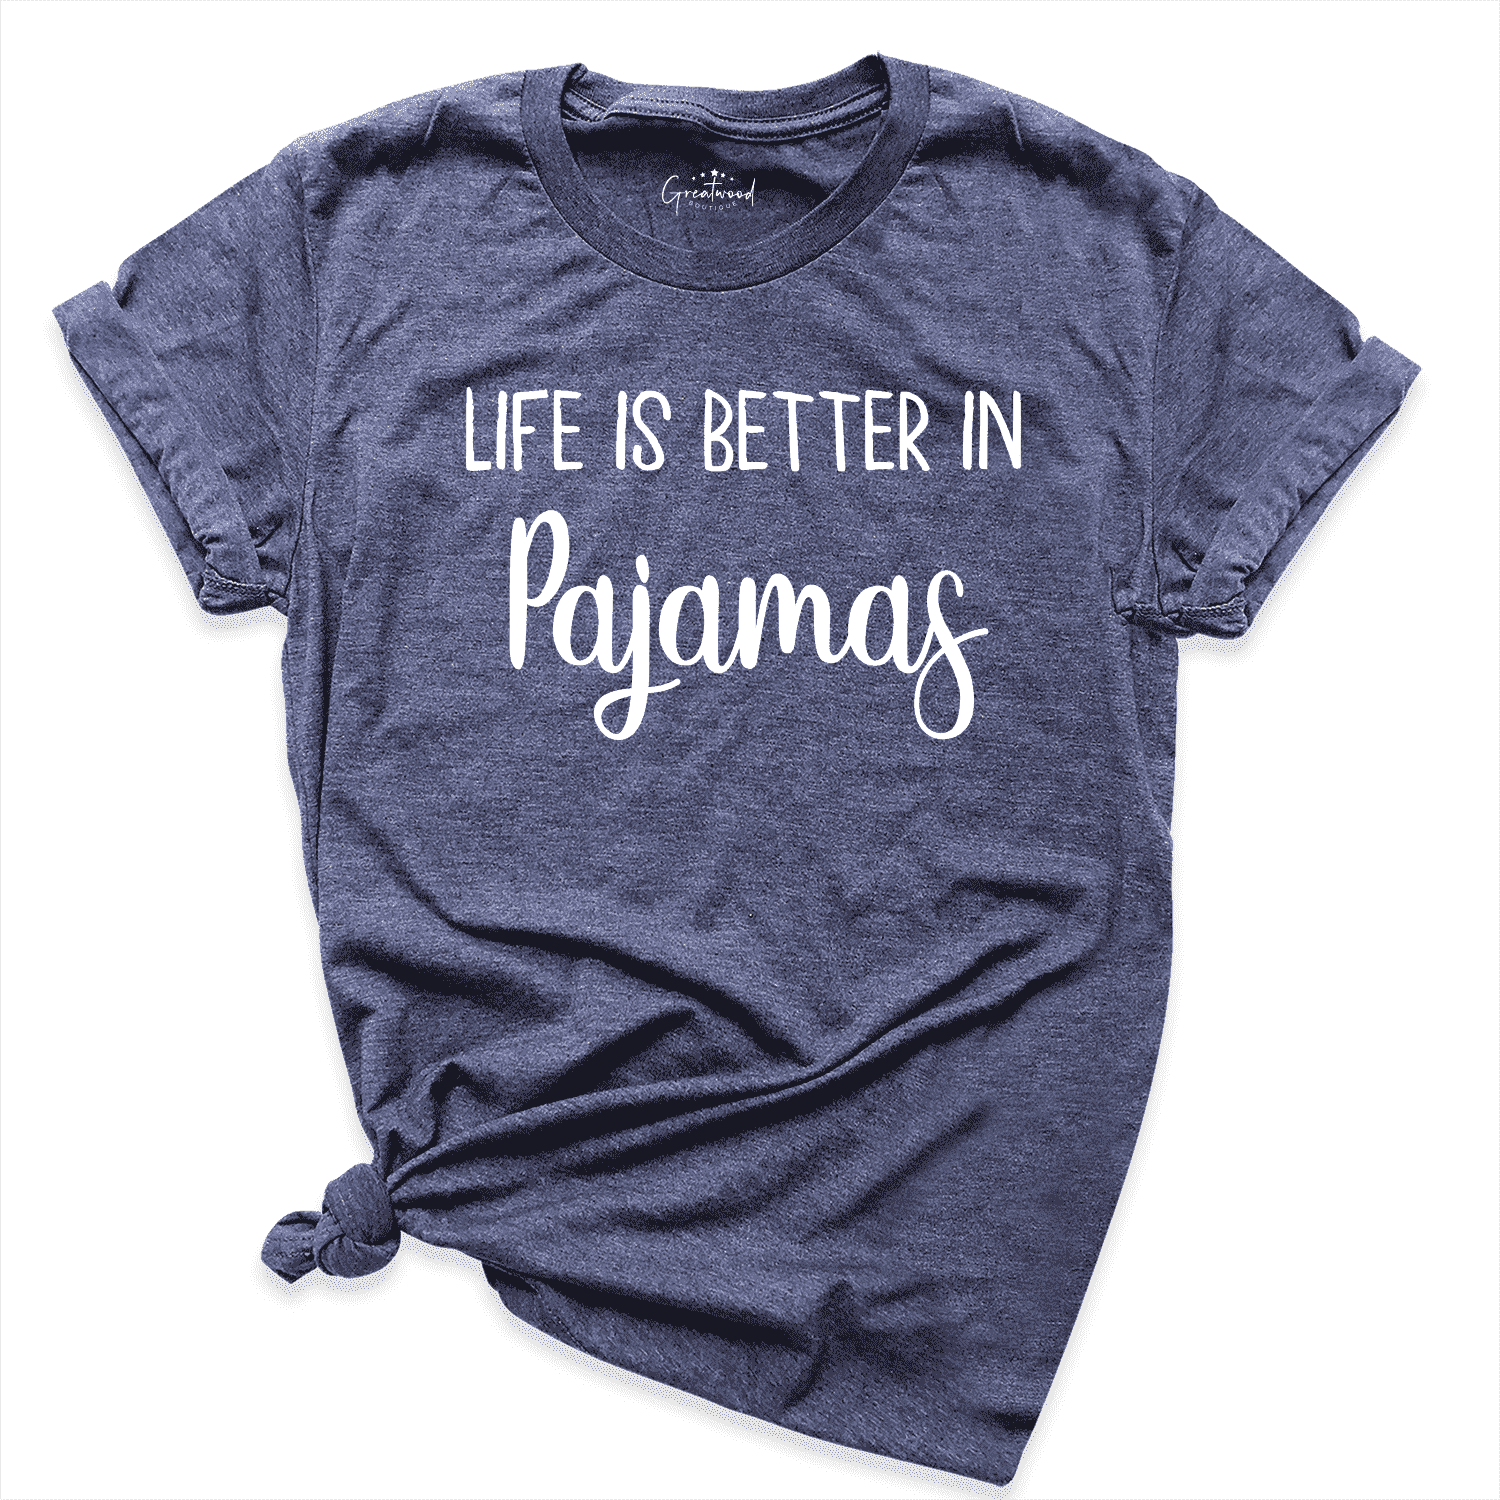 Life is Better in Pajamas Shirt Navy - Greatwood Boutique